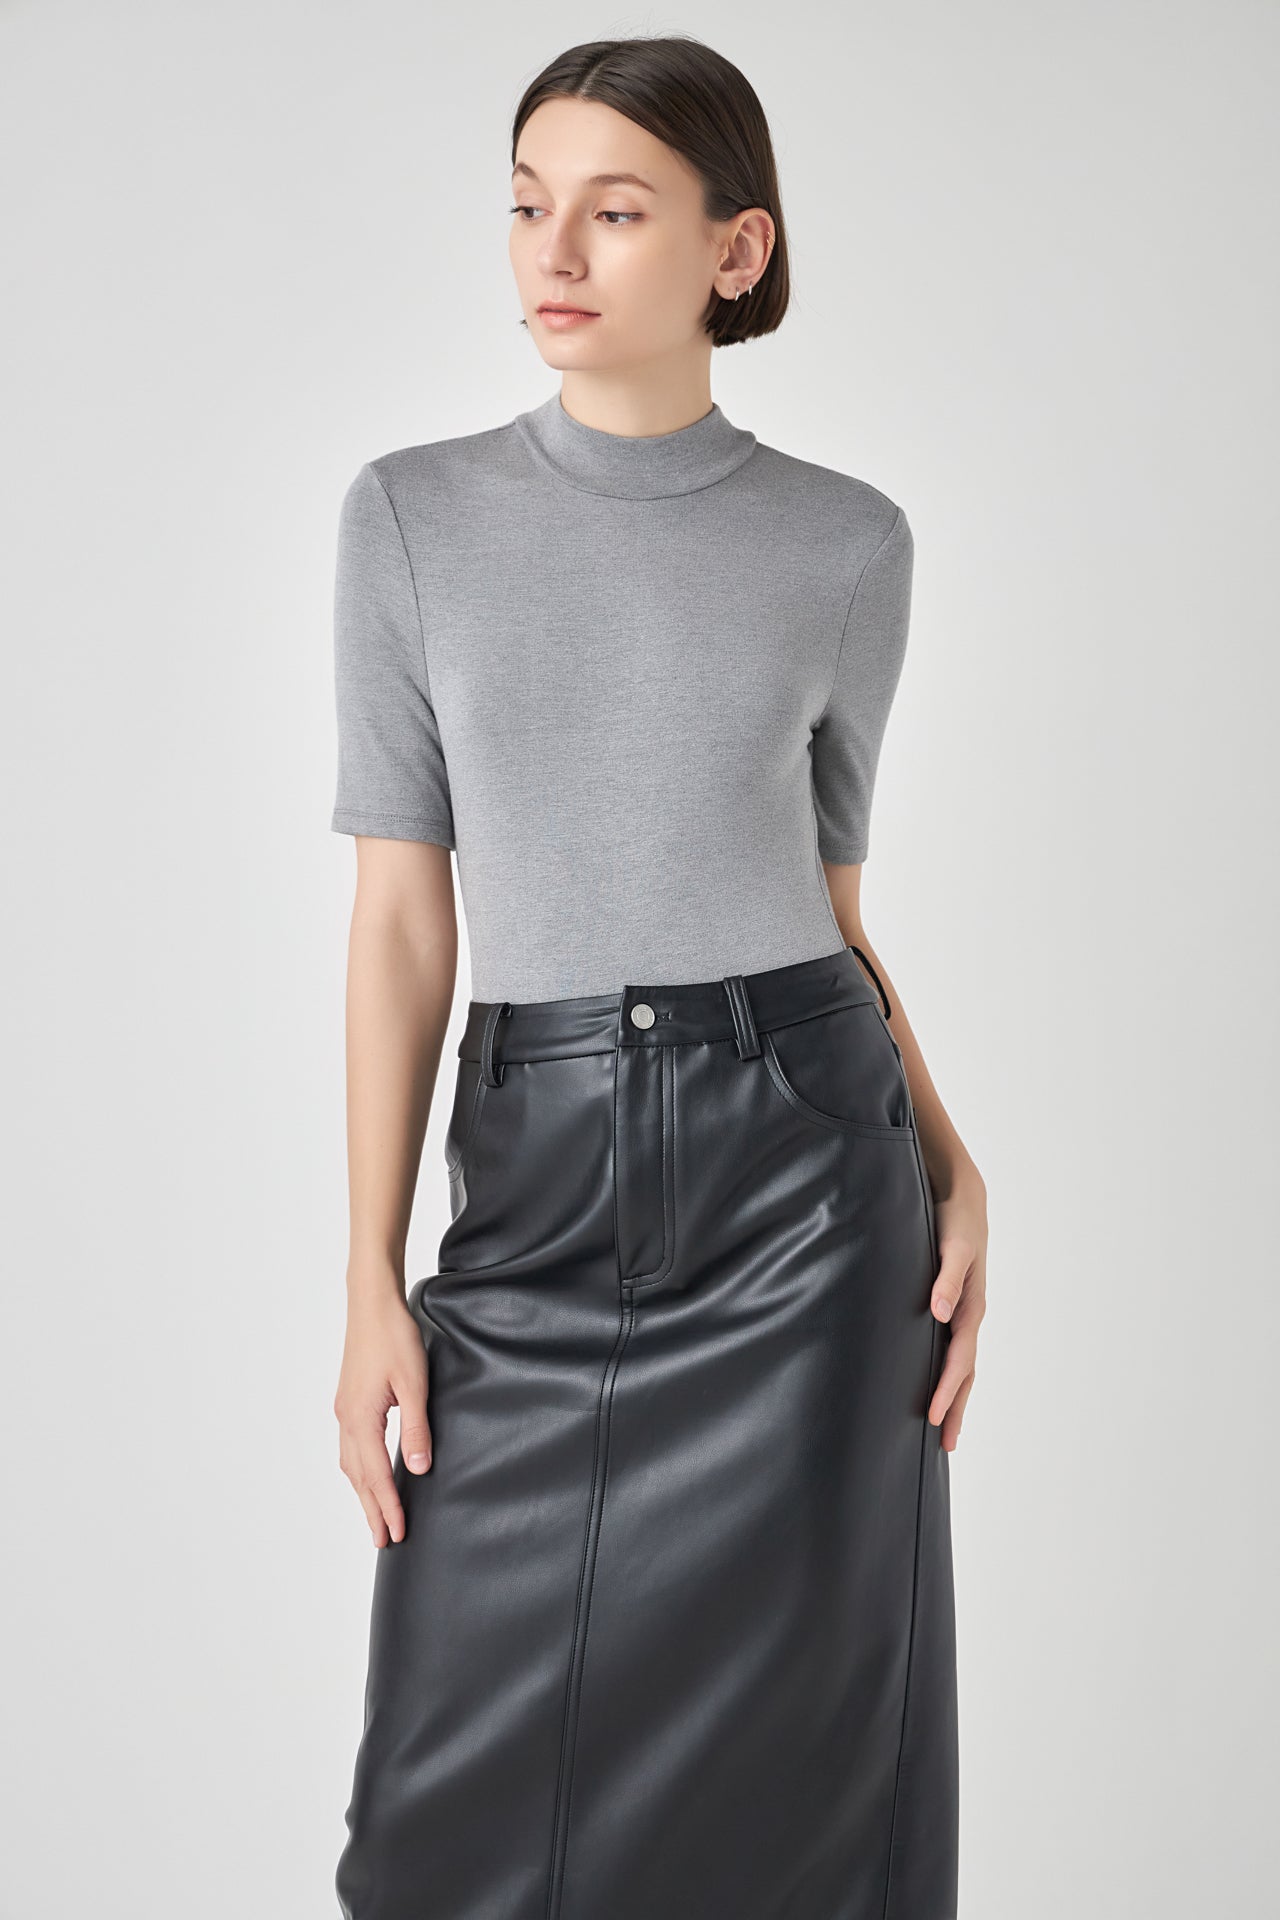 GREY LAB - Soft Mock Neck Bodysuit - TOPS available at Objectrare